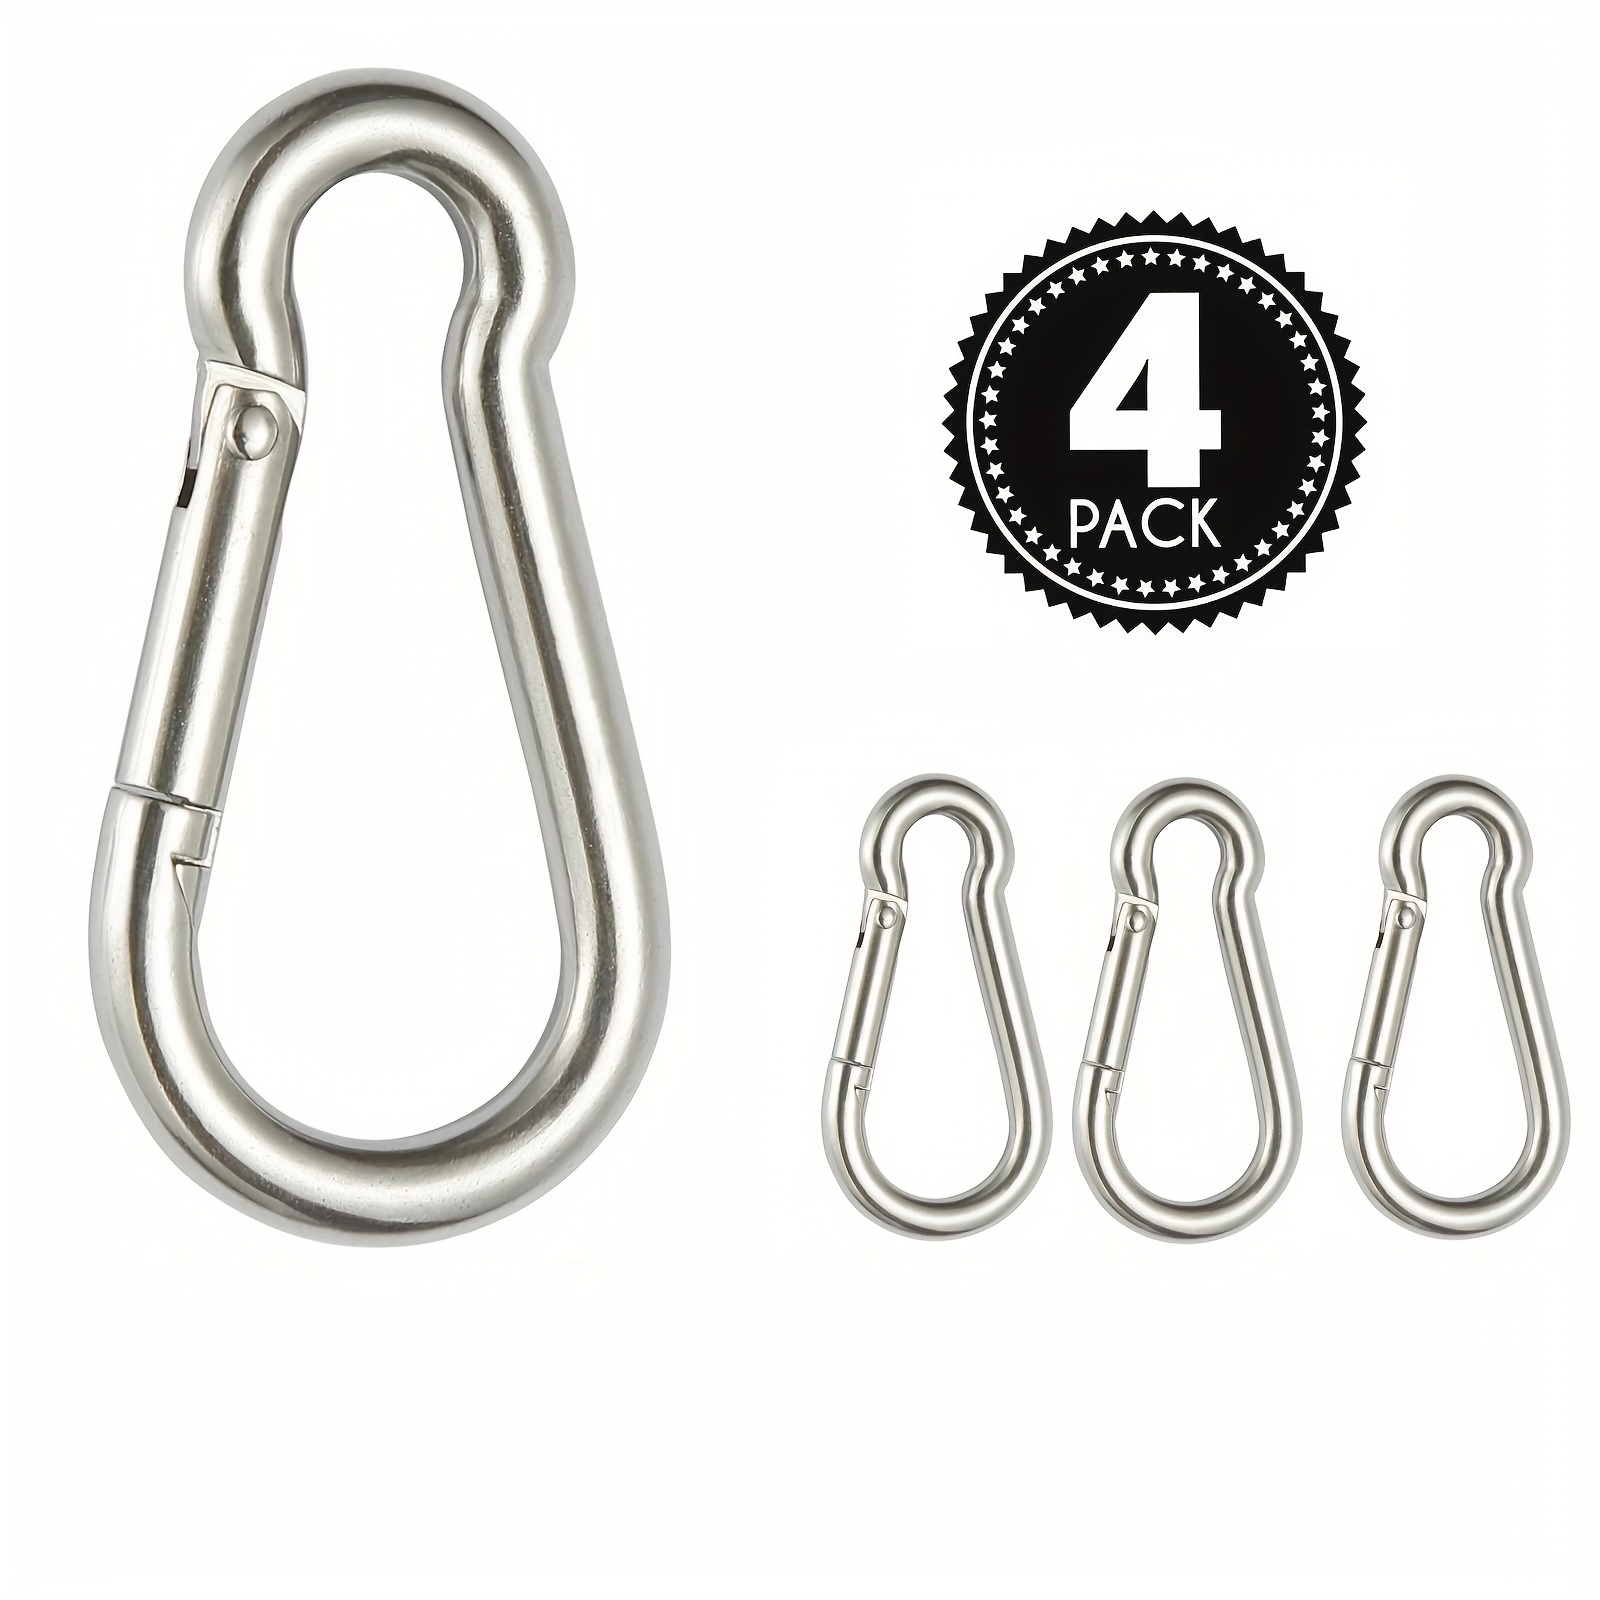 2pcs 4pcs Heavy Duty Stainless Steel Carabiner Clips Assorted